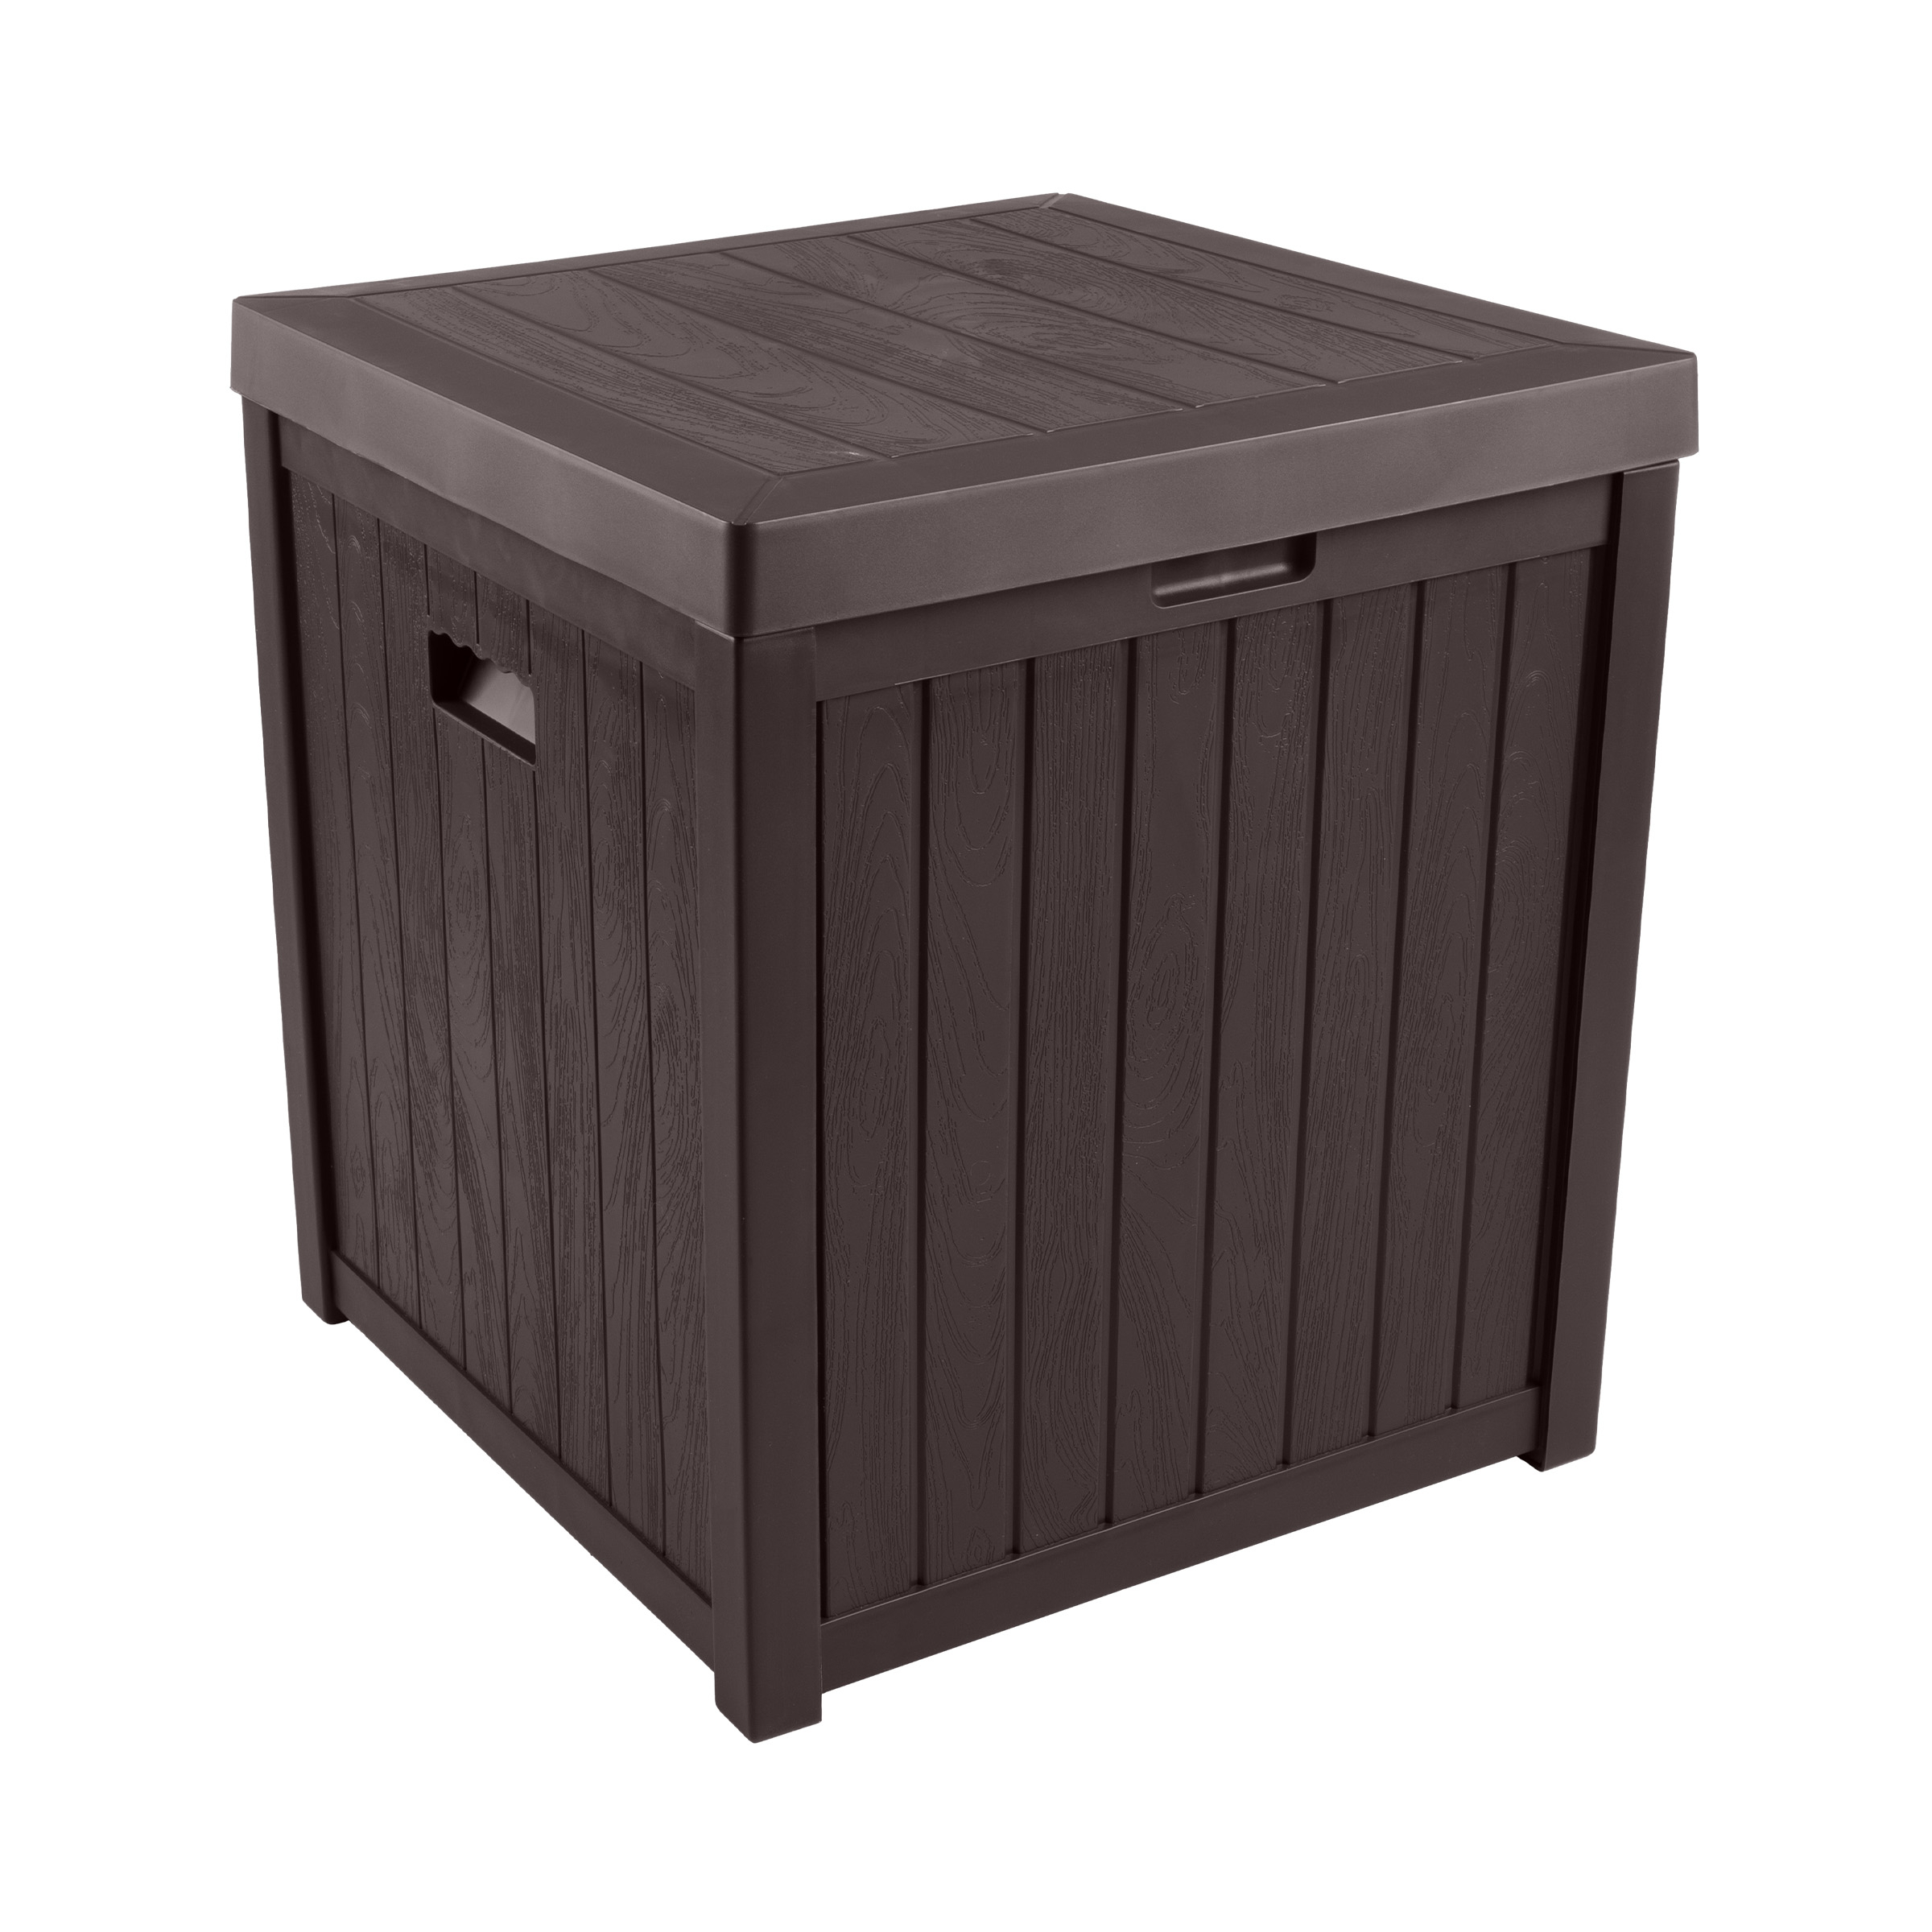 Outdoor Indoor 50 Gallon Storage Container Resin Deck Box 22 X 24 Inch - Gray